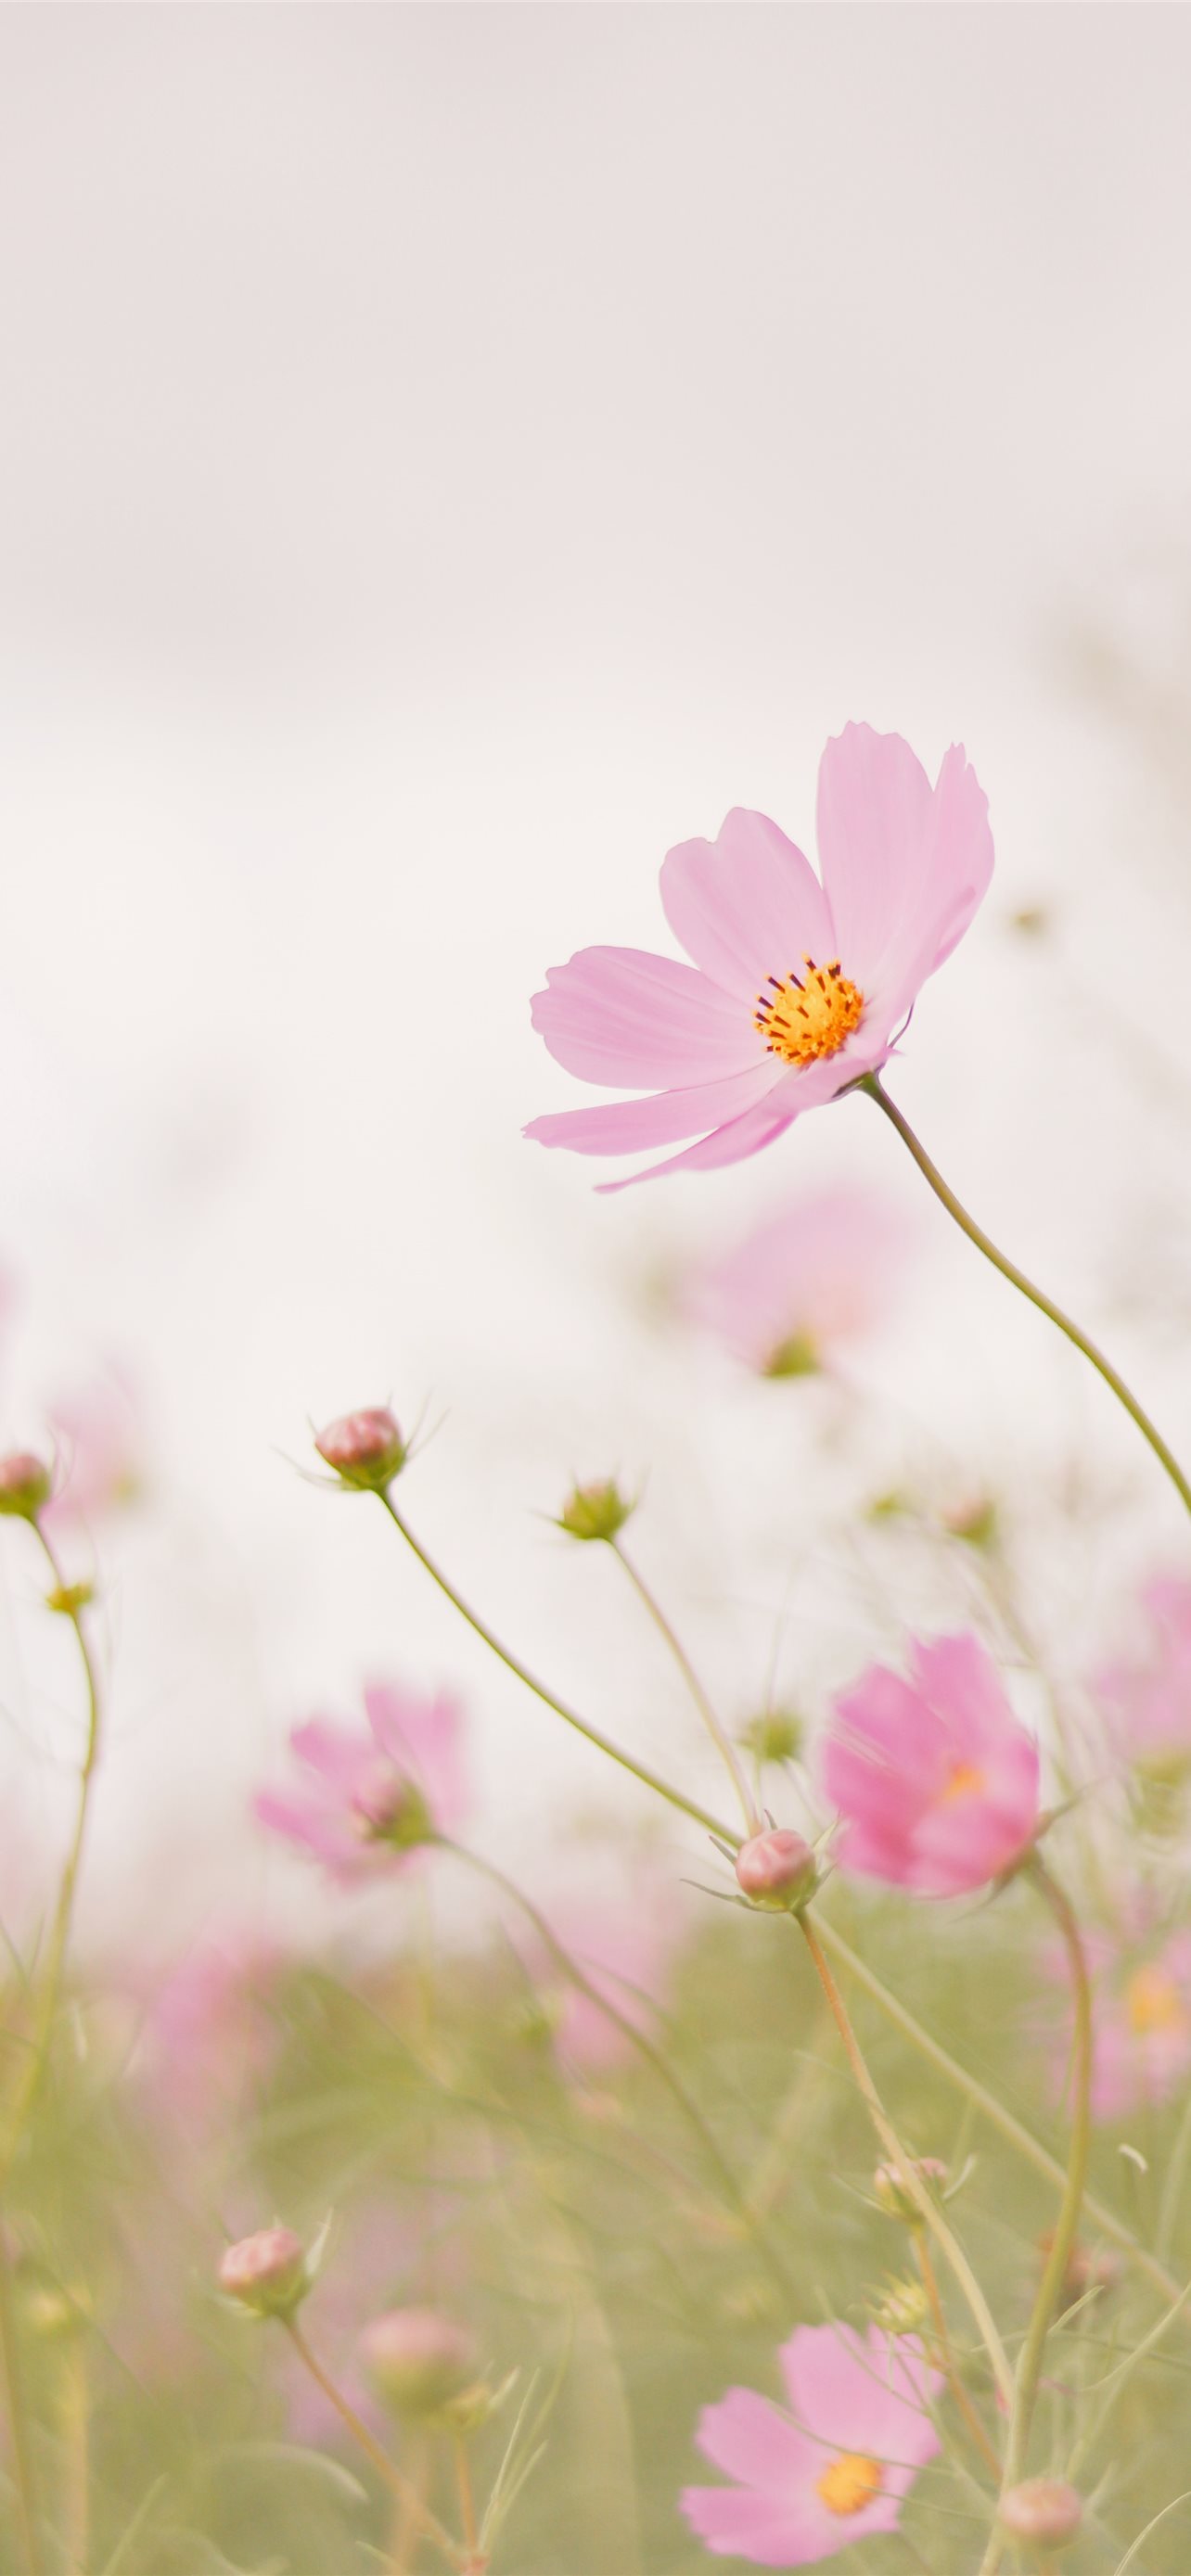 pink cosmos flower in bloom during daytime iPhone 12 Wallpaper Free Download